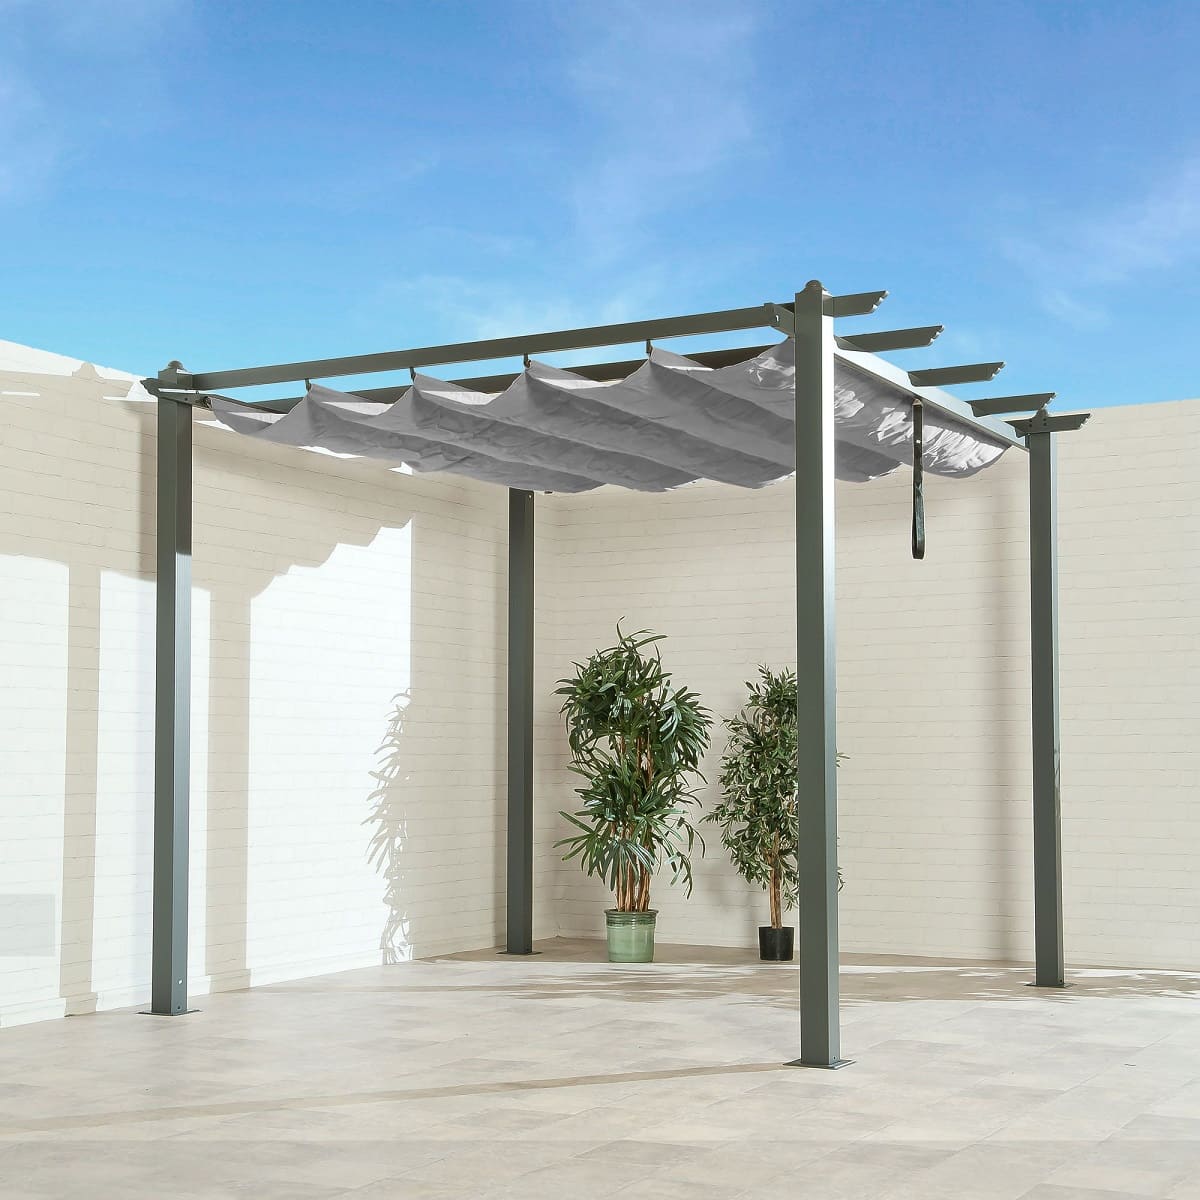 How To Make A Retractable Canopy For A Pergola